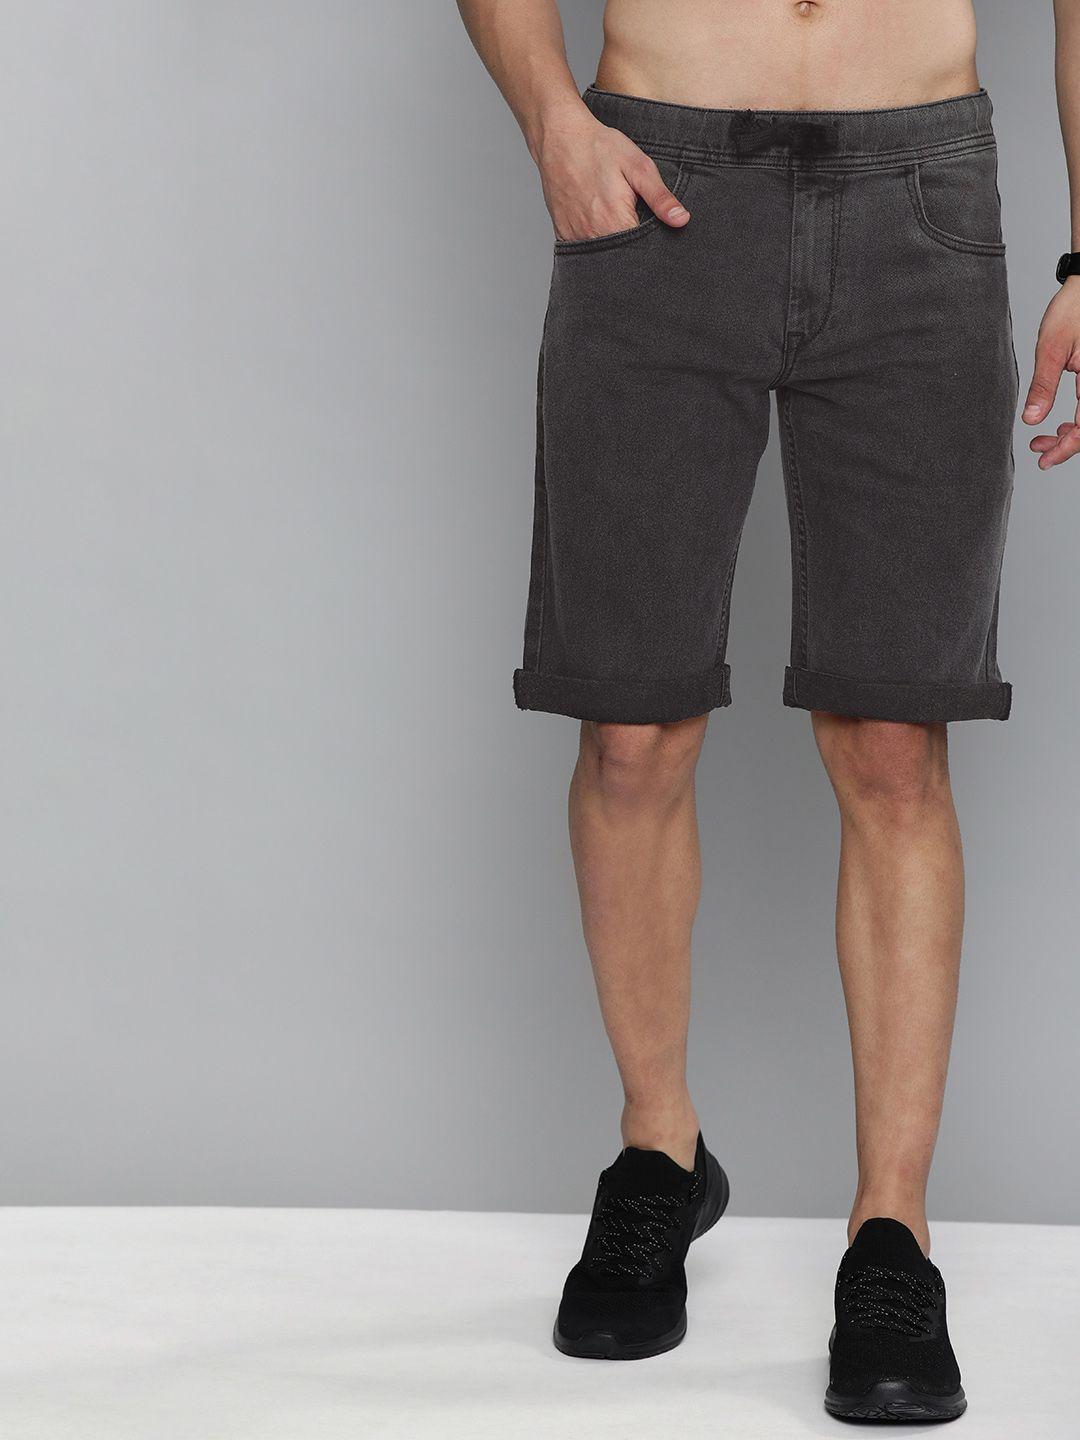 here&now men charcoal grey solid slim fit denim shorts